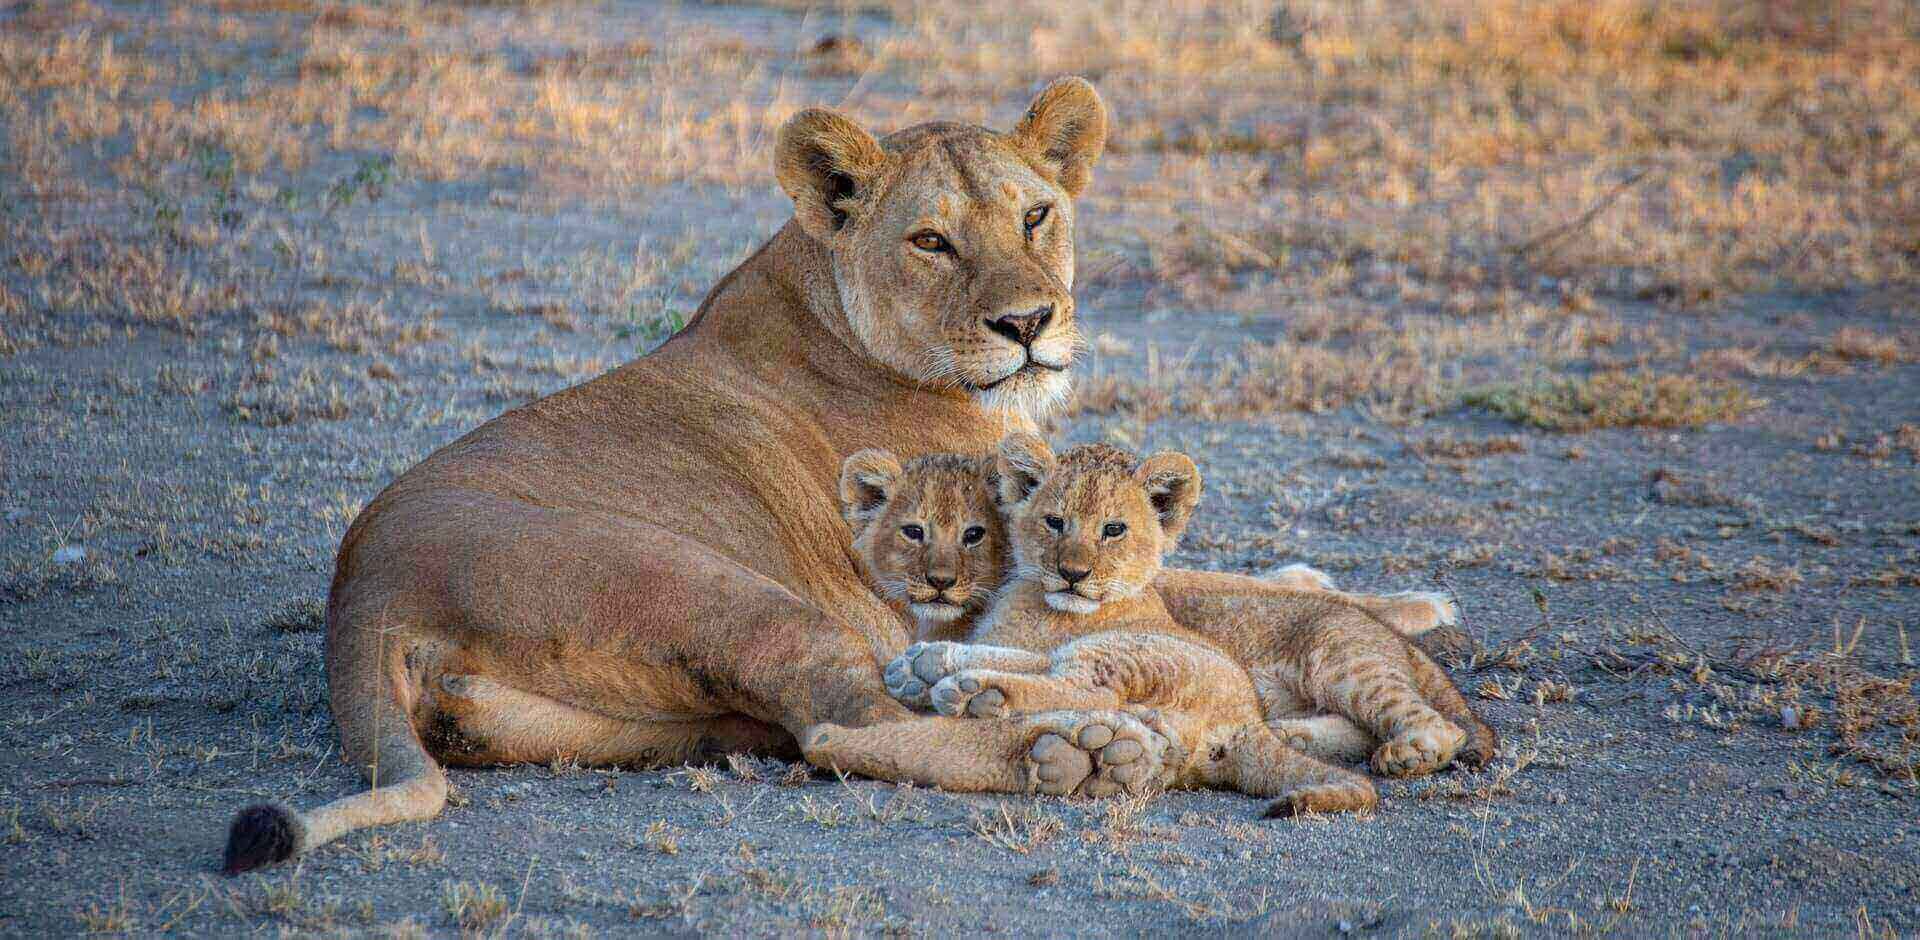 A lioness and her two cubs